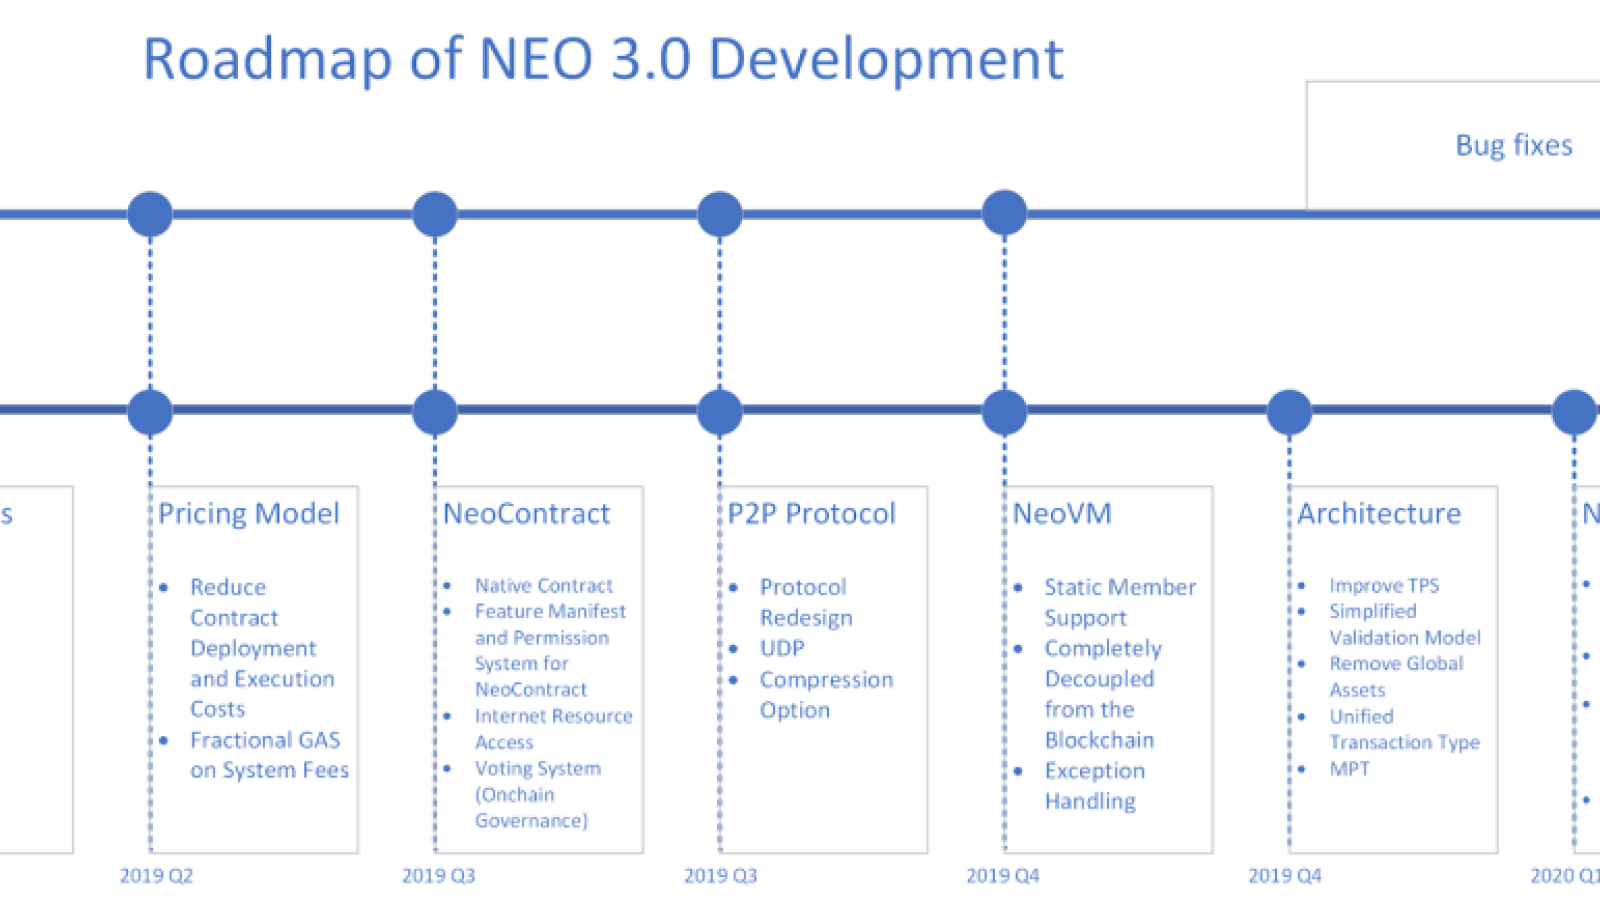 Roadmap of NEO 3.0 by chainnews.com